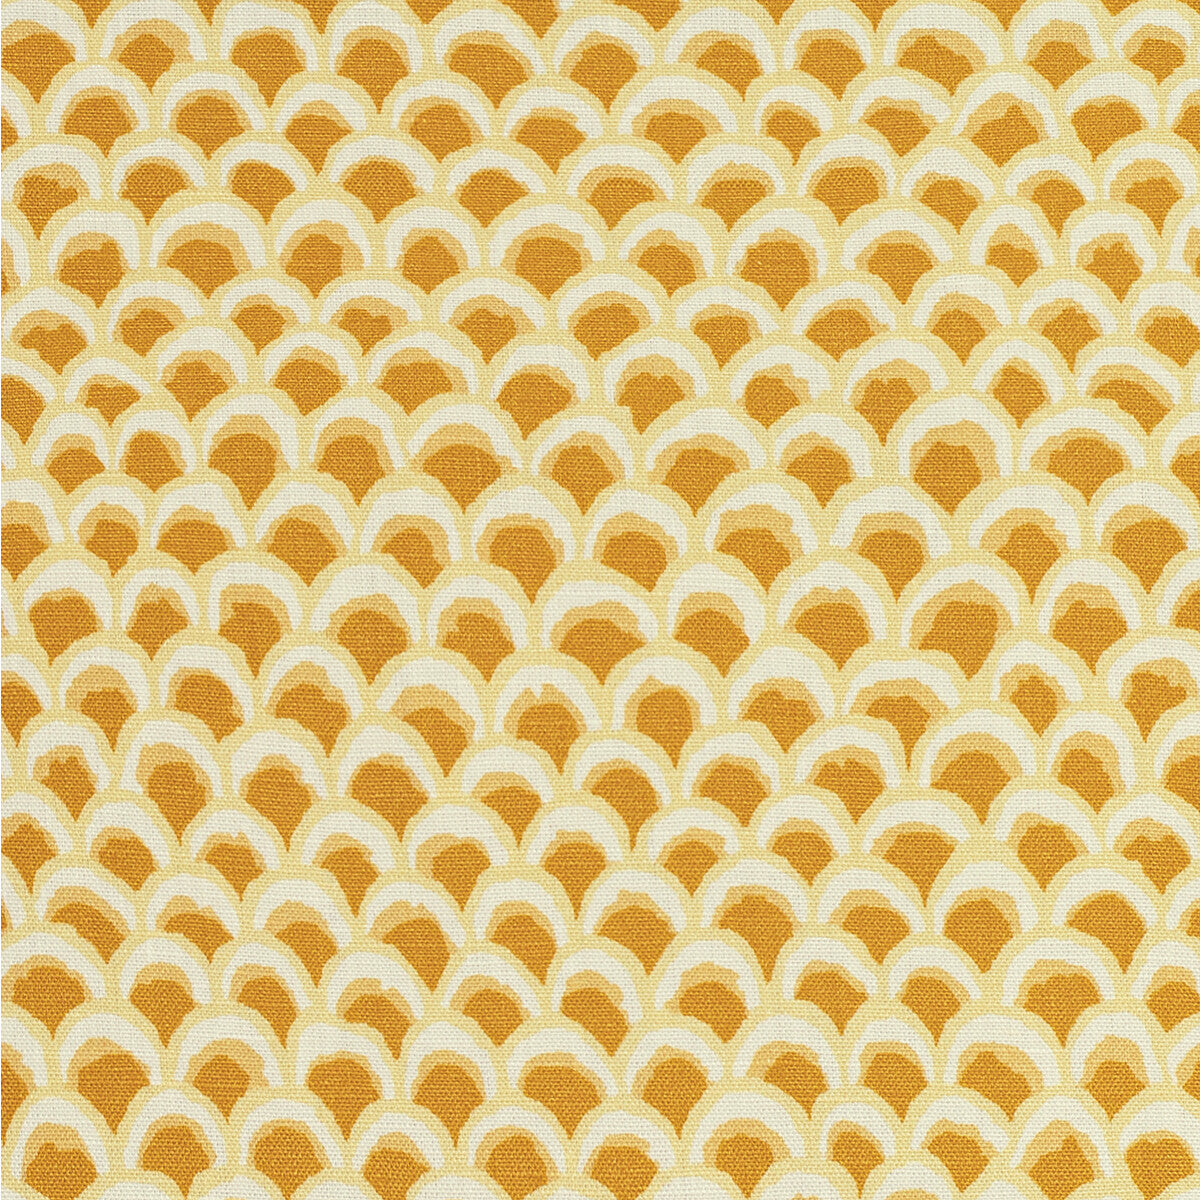 Pave II Print fabric in canary color - pattern 8020126.40.0 - by Brunschwig &amp; Fils in the Louverne collection